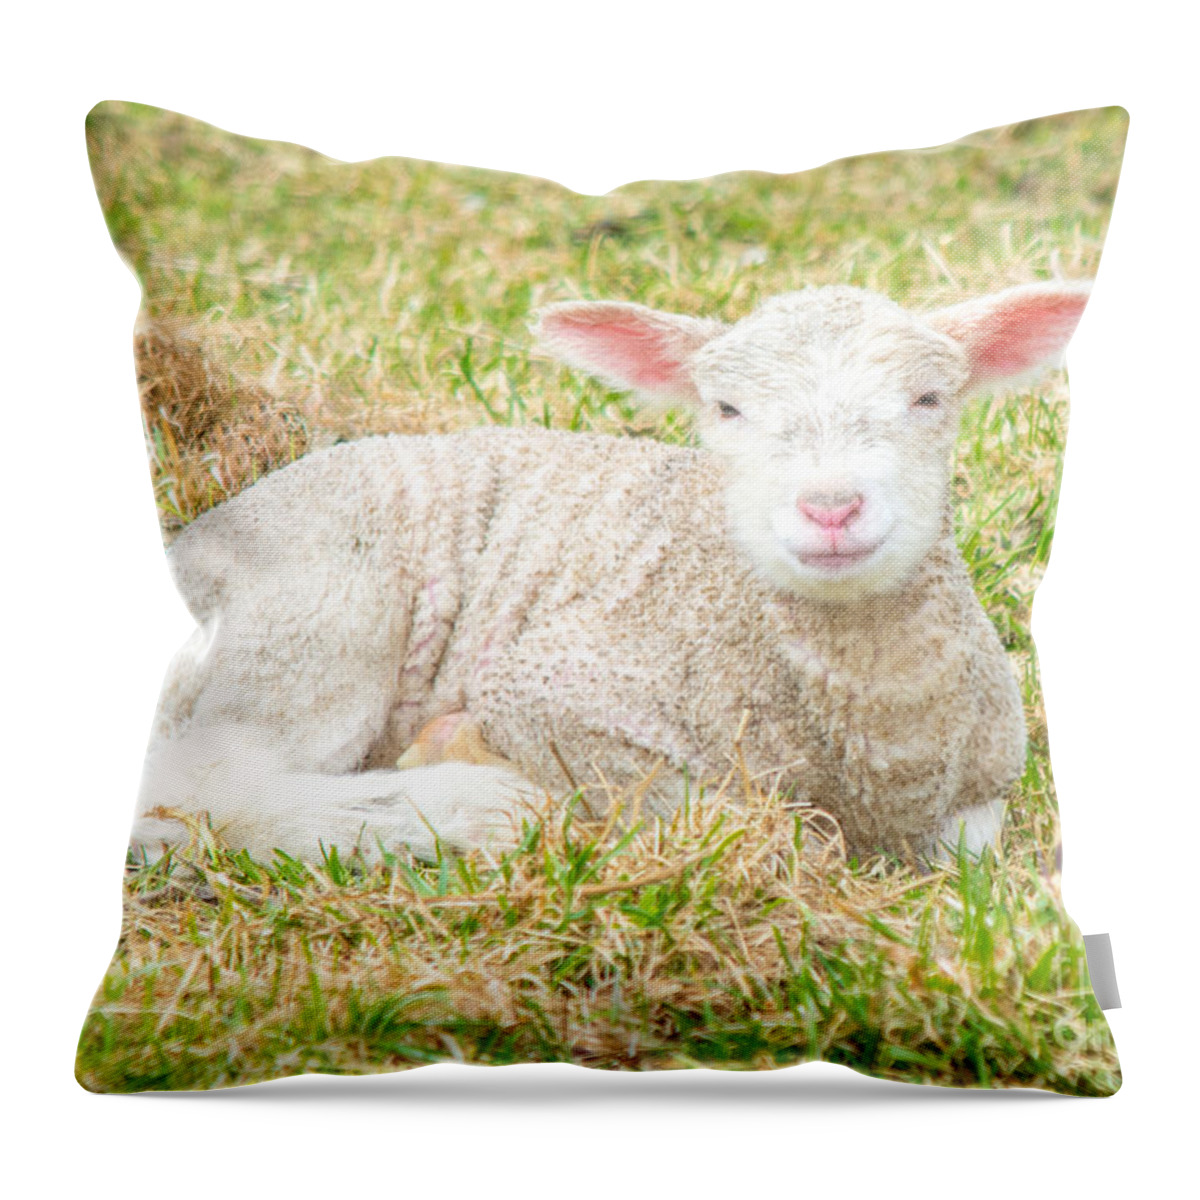 Rustic Scene Throw Pillow featuring the photograph Pink and New by Cheryl Baxter